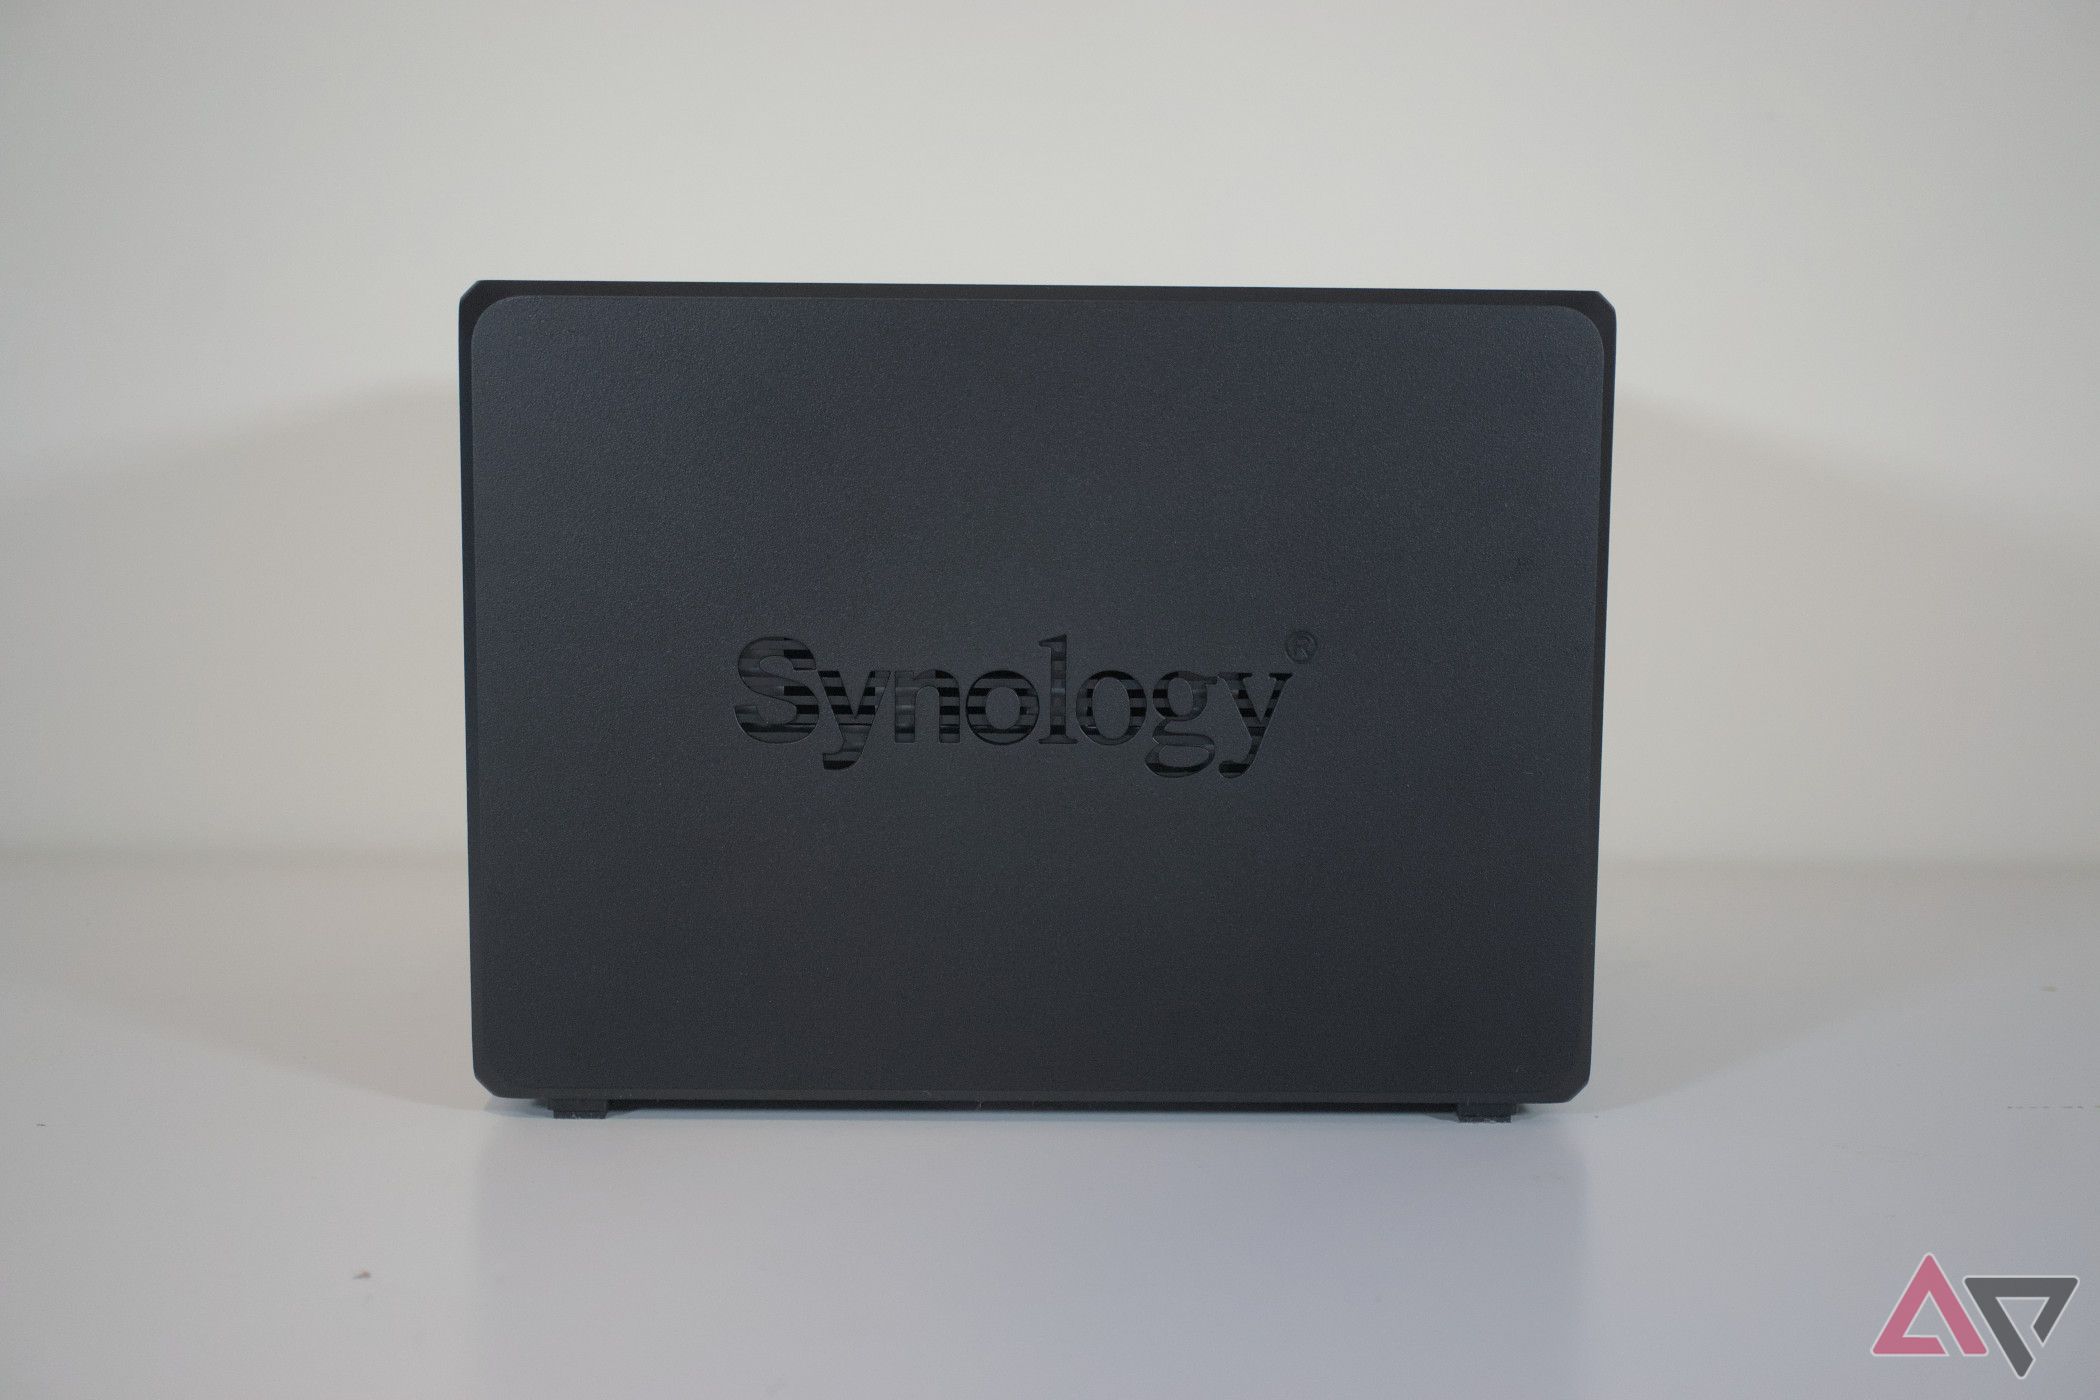 Synology DiskStation DS923+ review: An AMD-powered NAS with a few minor ...